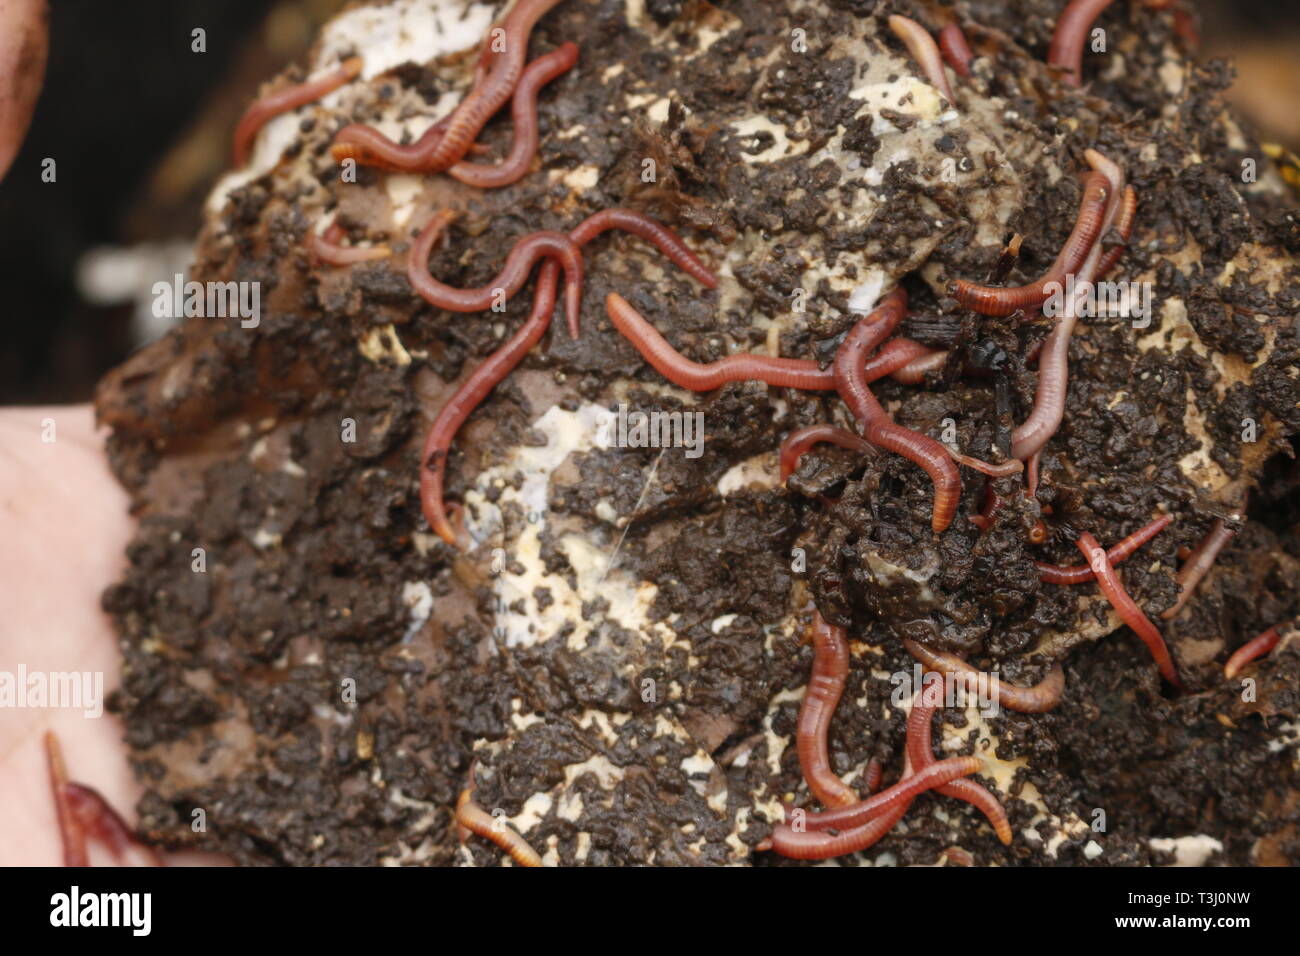 https://c8.alamy.com/comp/T3J0NW/red-worms-in-compost-or-manure-live-bait-for-fishing-T3J0NW.jpg